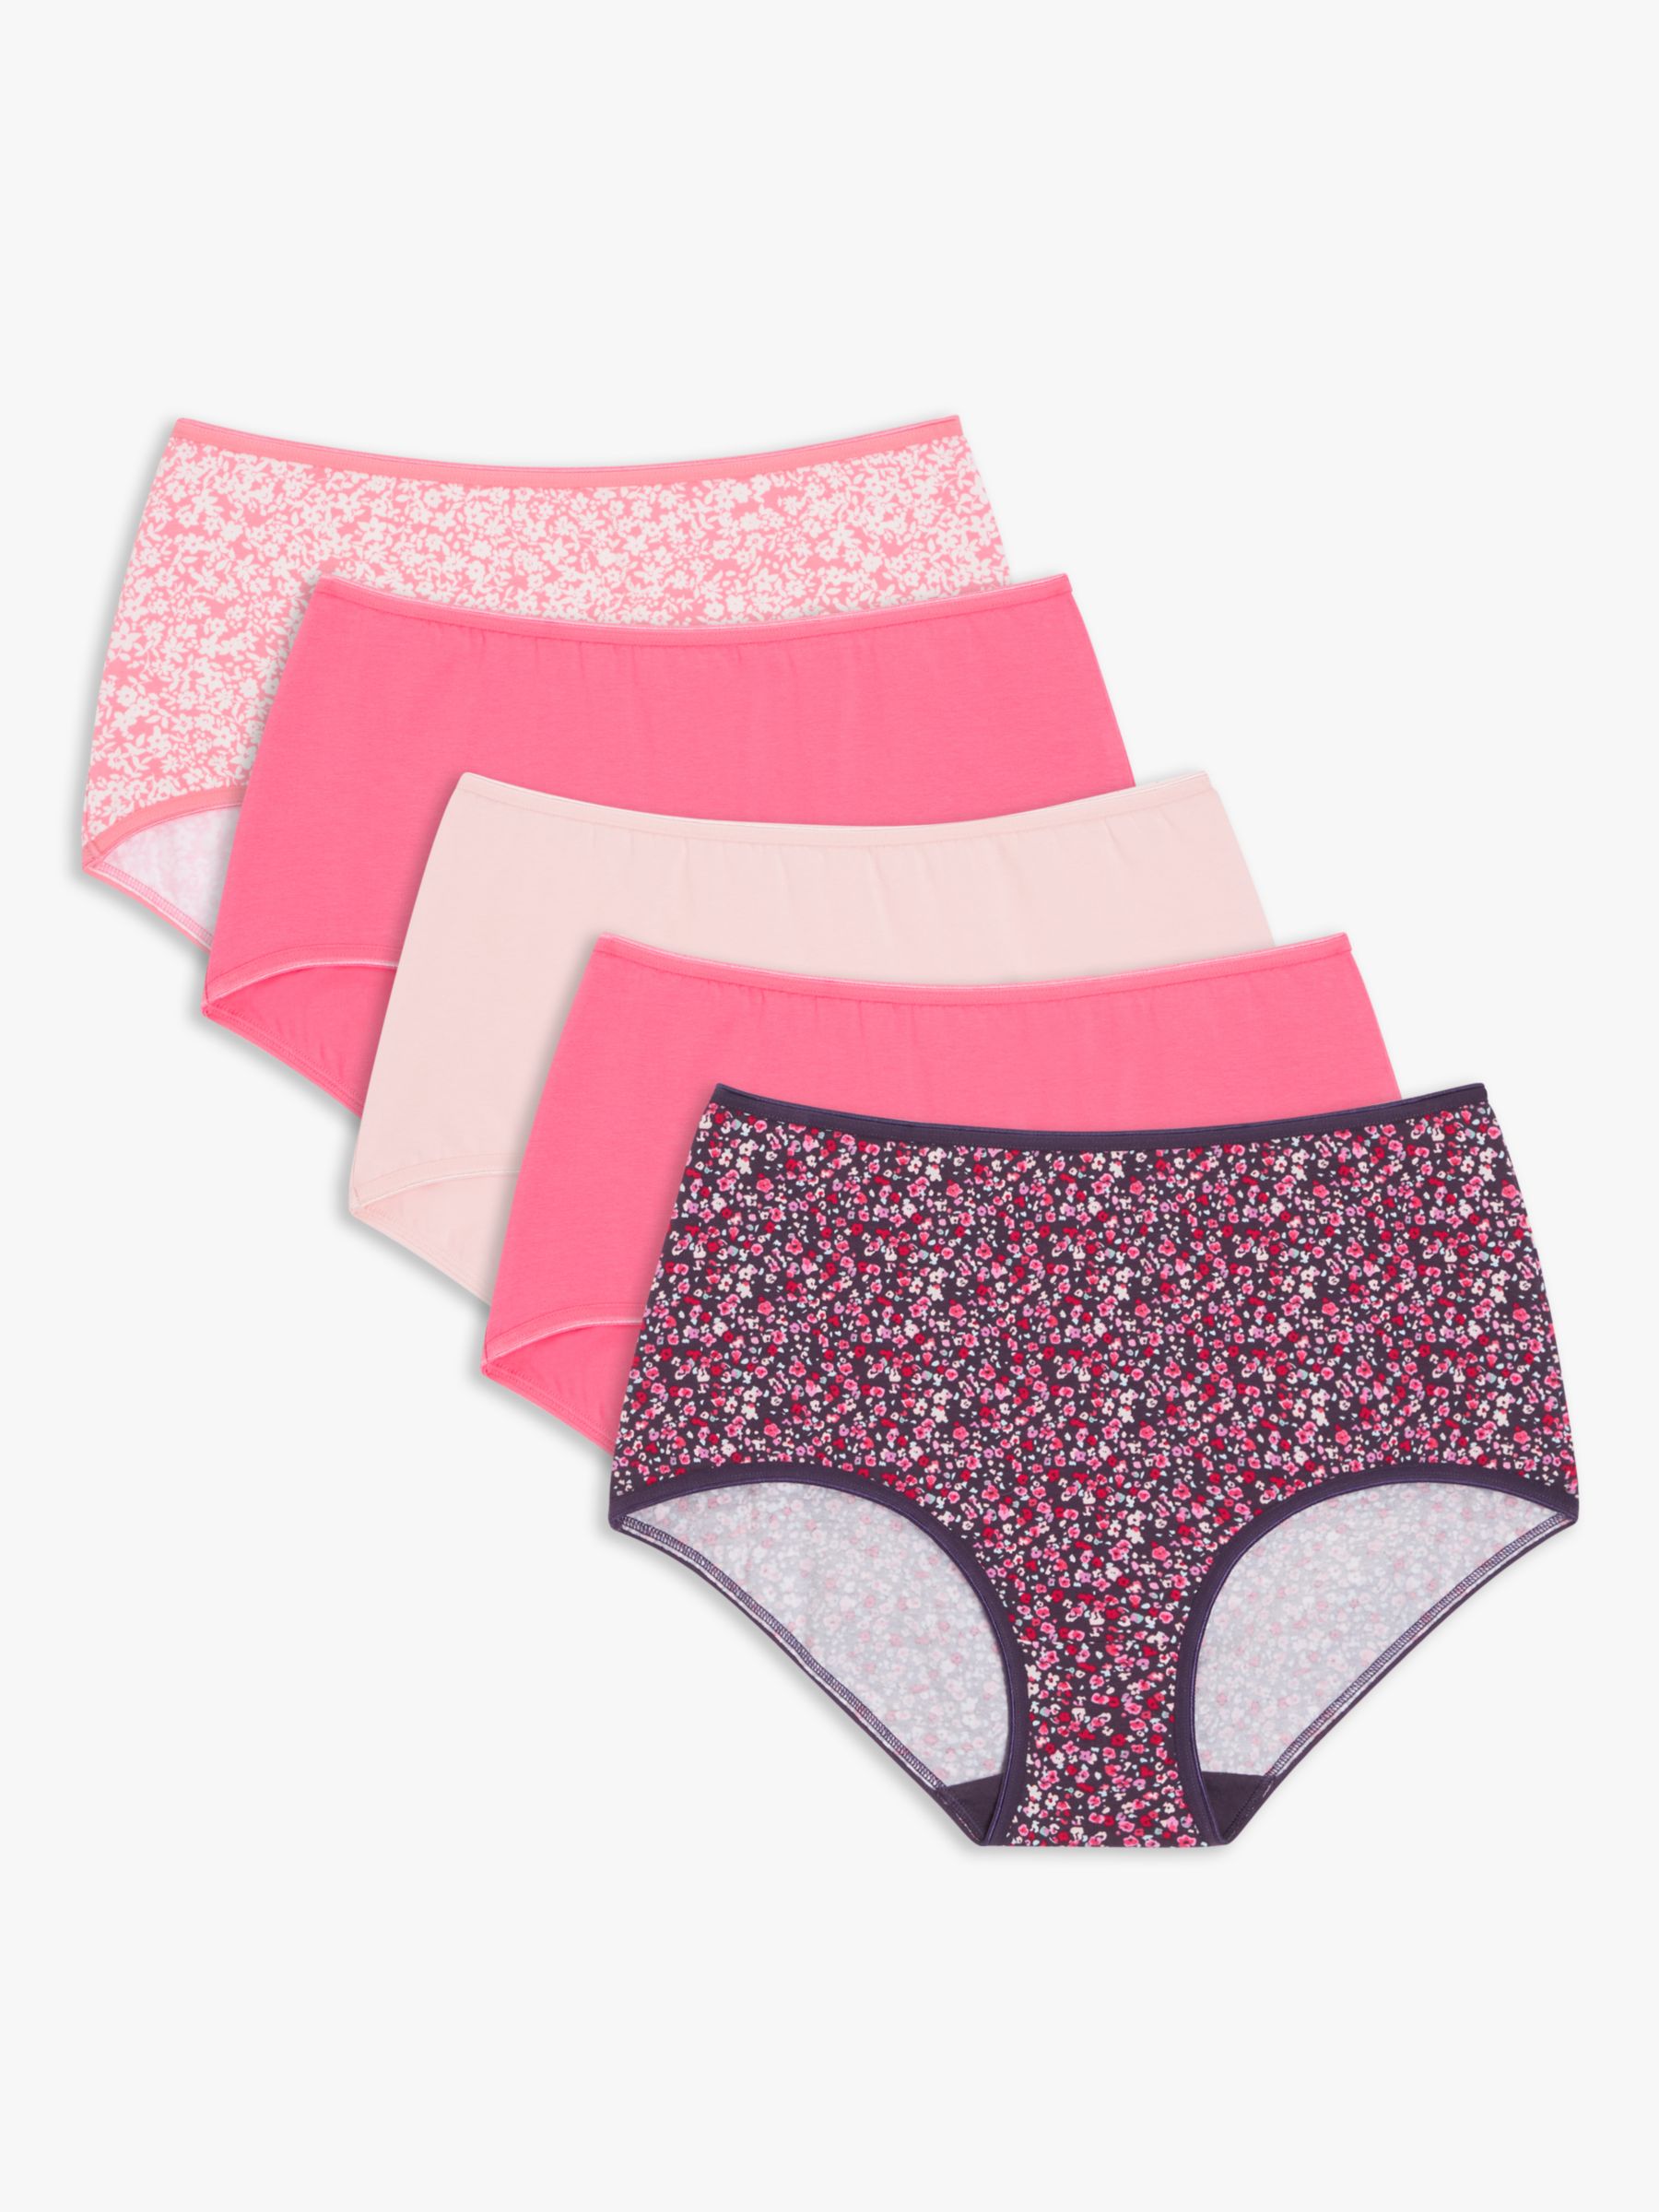 Buy Pink/Purple/Cream Short Cotton and Lace Knickers 4 Pack from